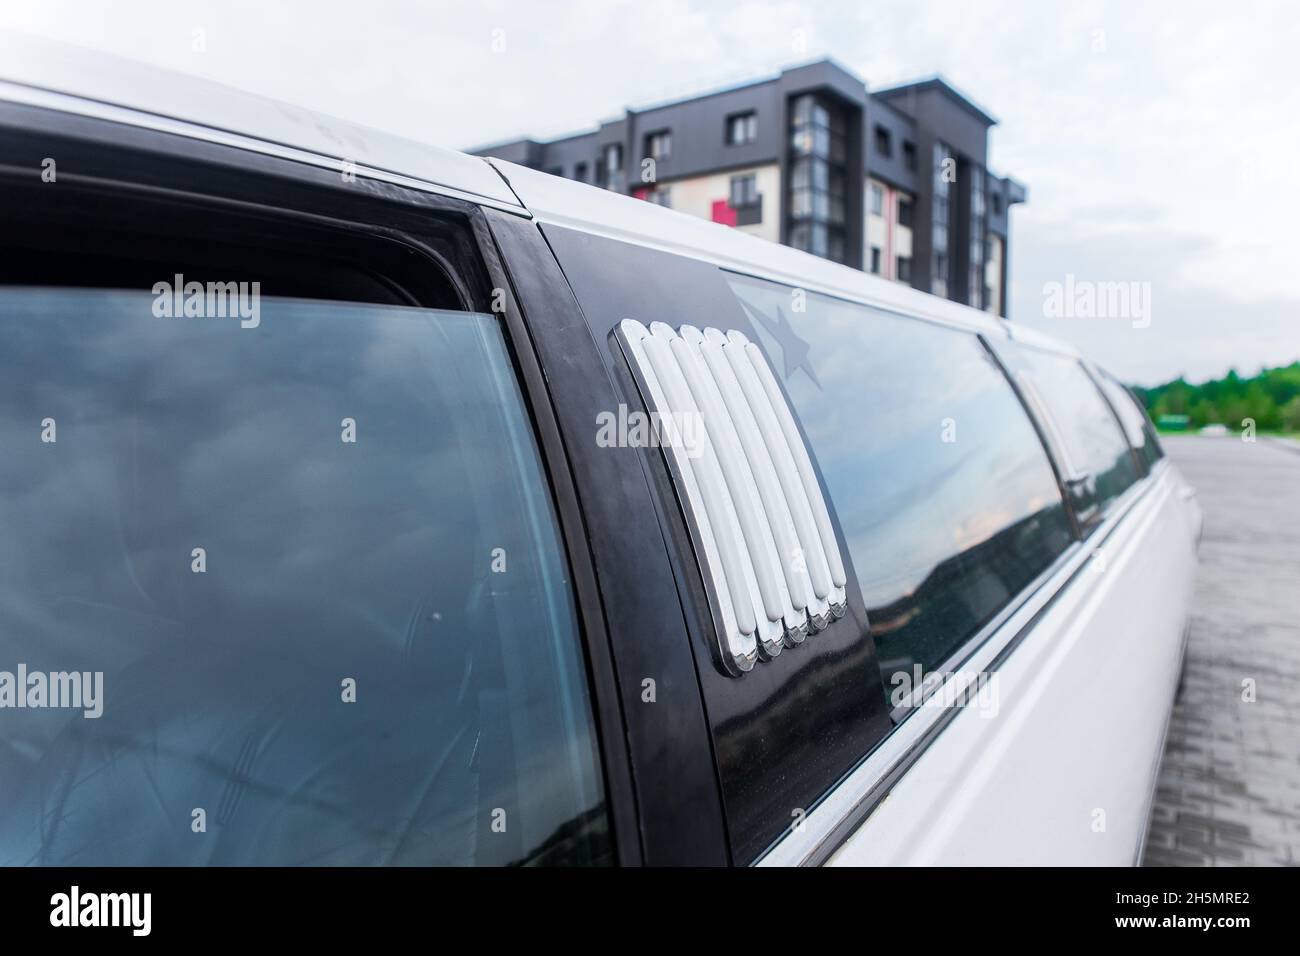 Part of the luxury car design white limousine and window, close-up. Stock Photo